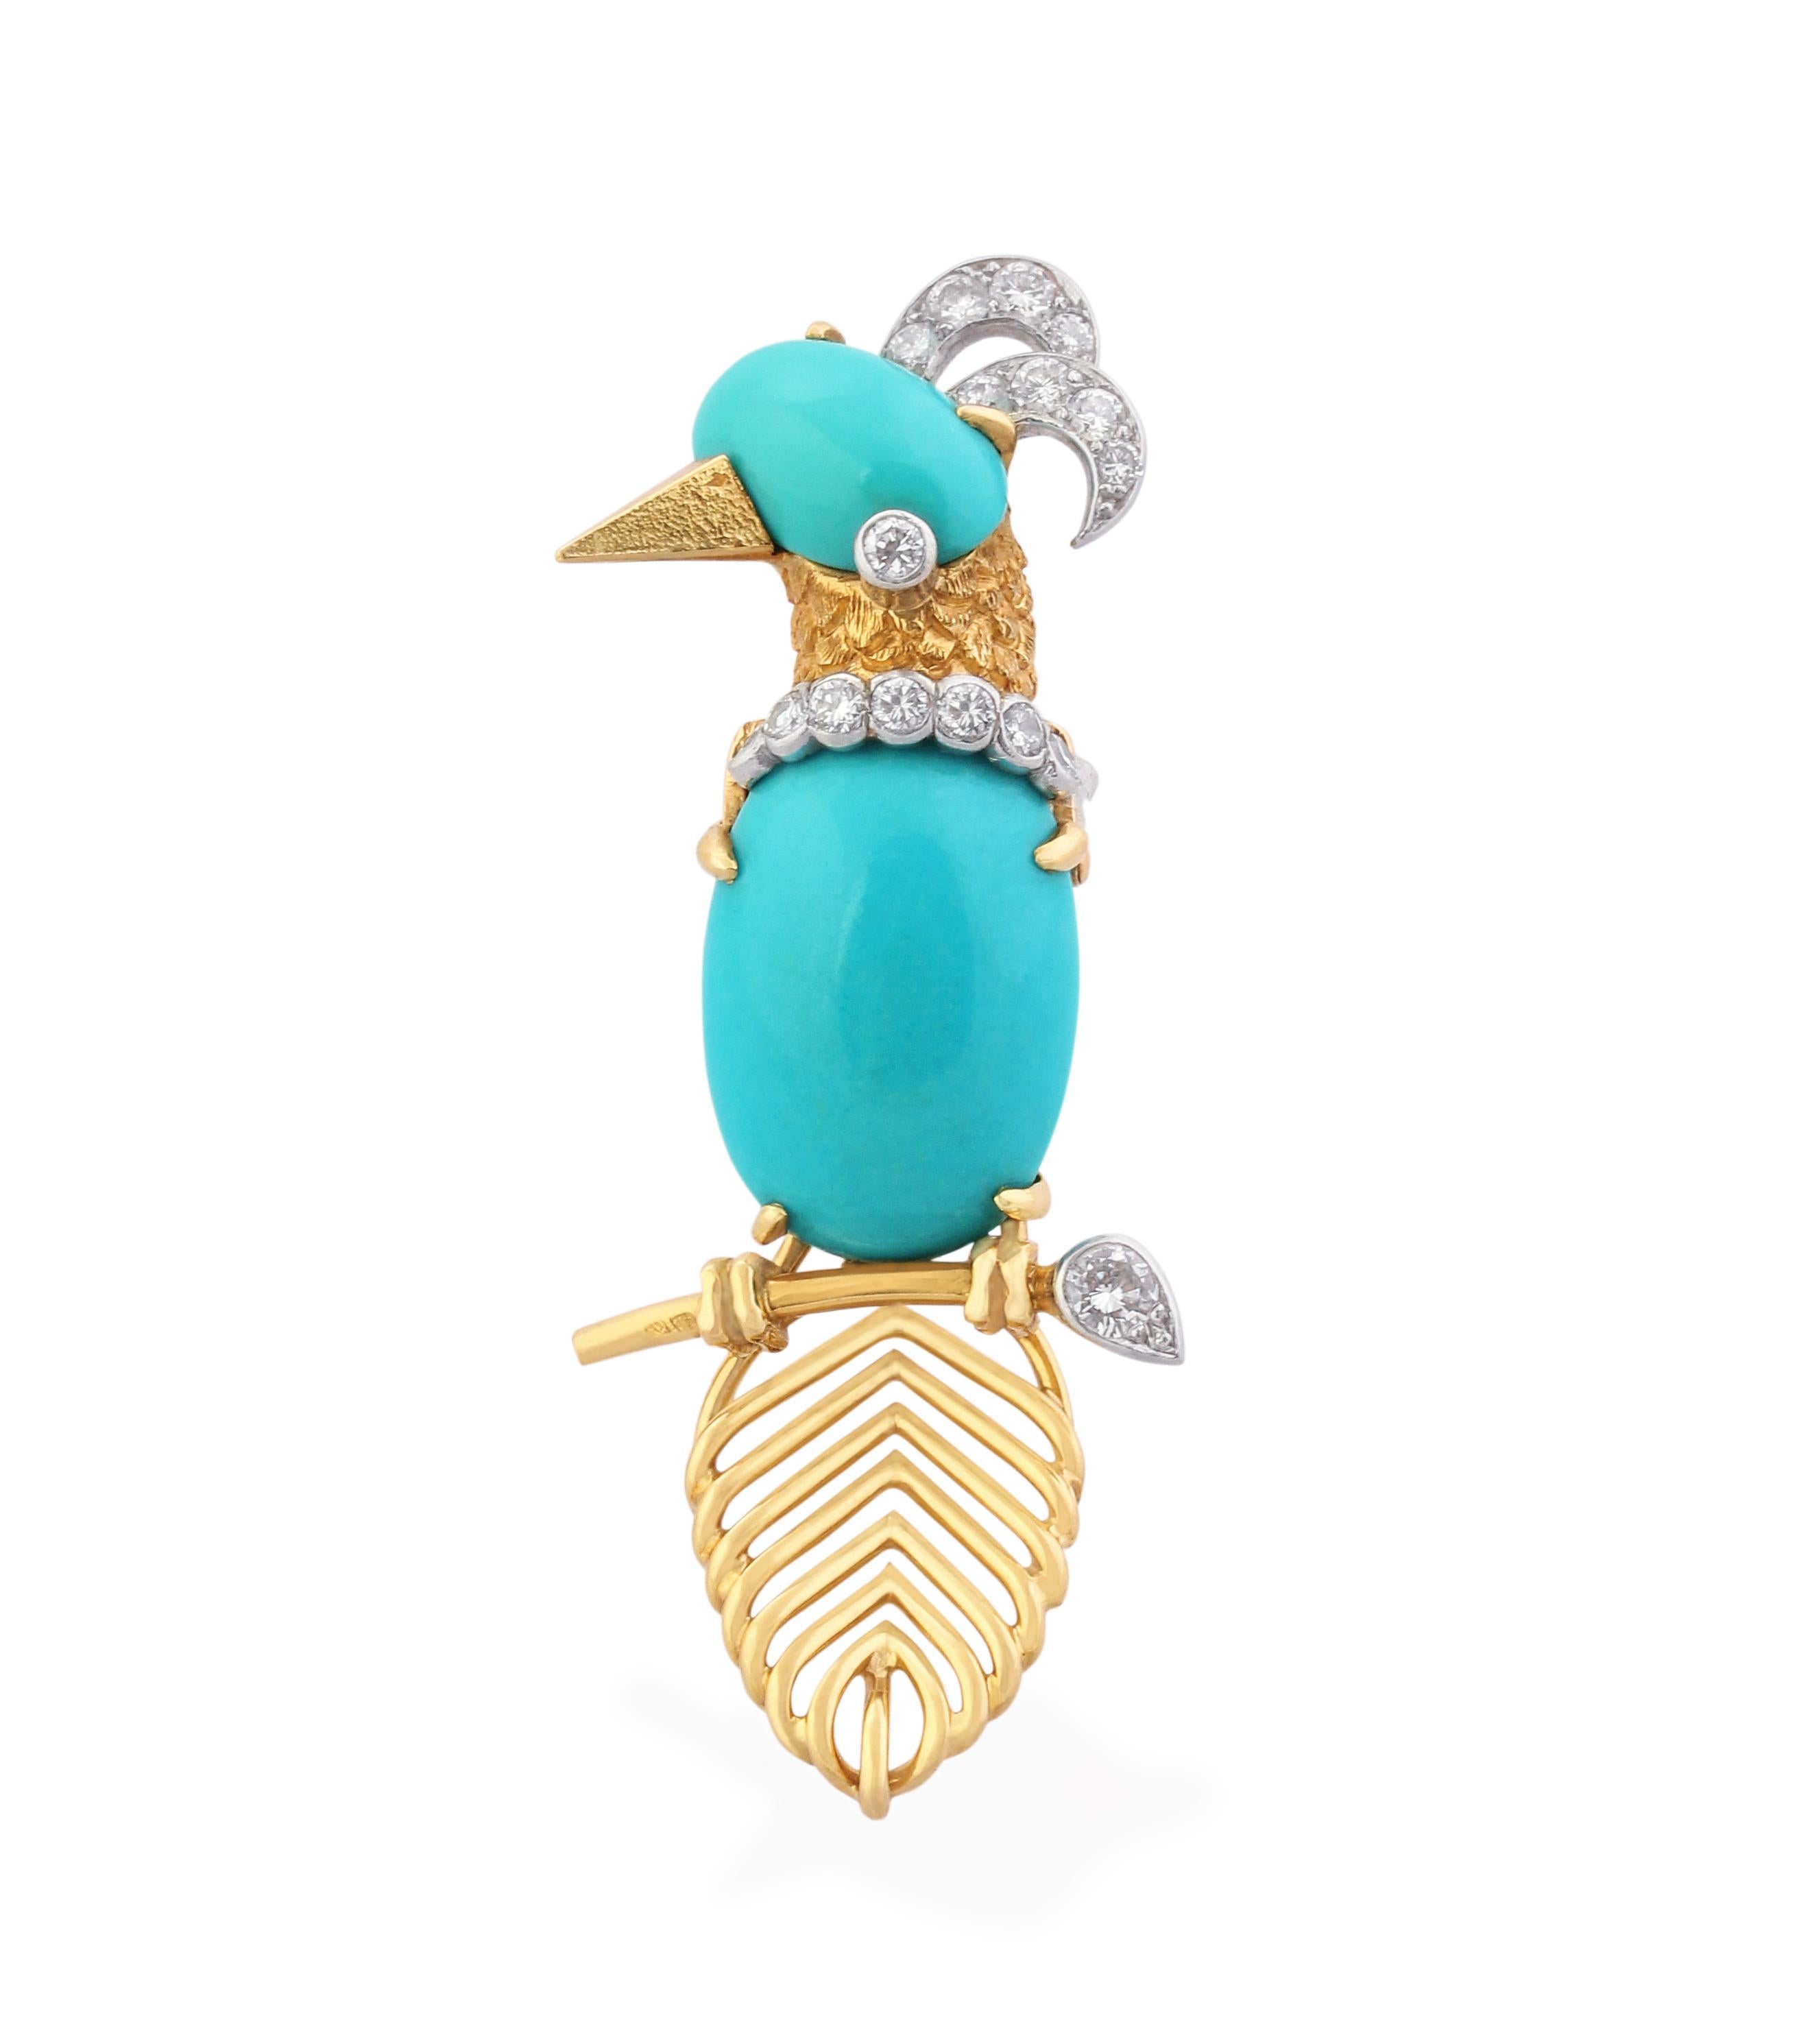 Cabochon Gold, Diamond and Turquoise Woodpecker Brooch by Cartier